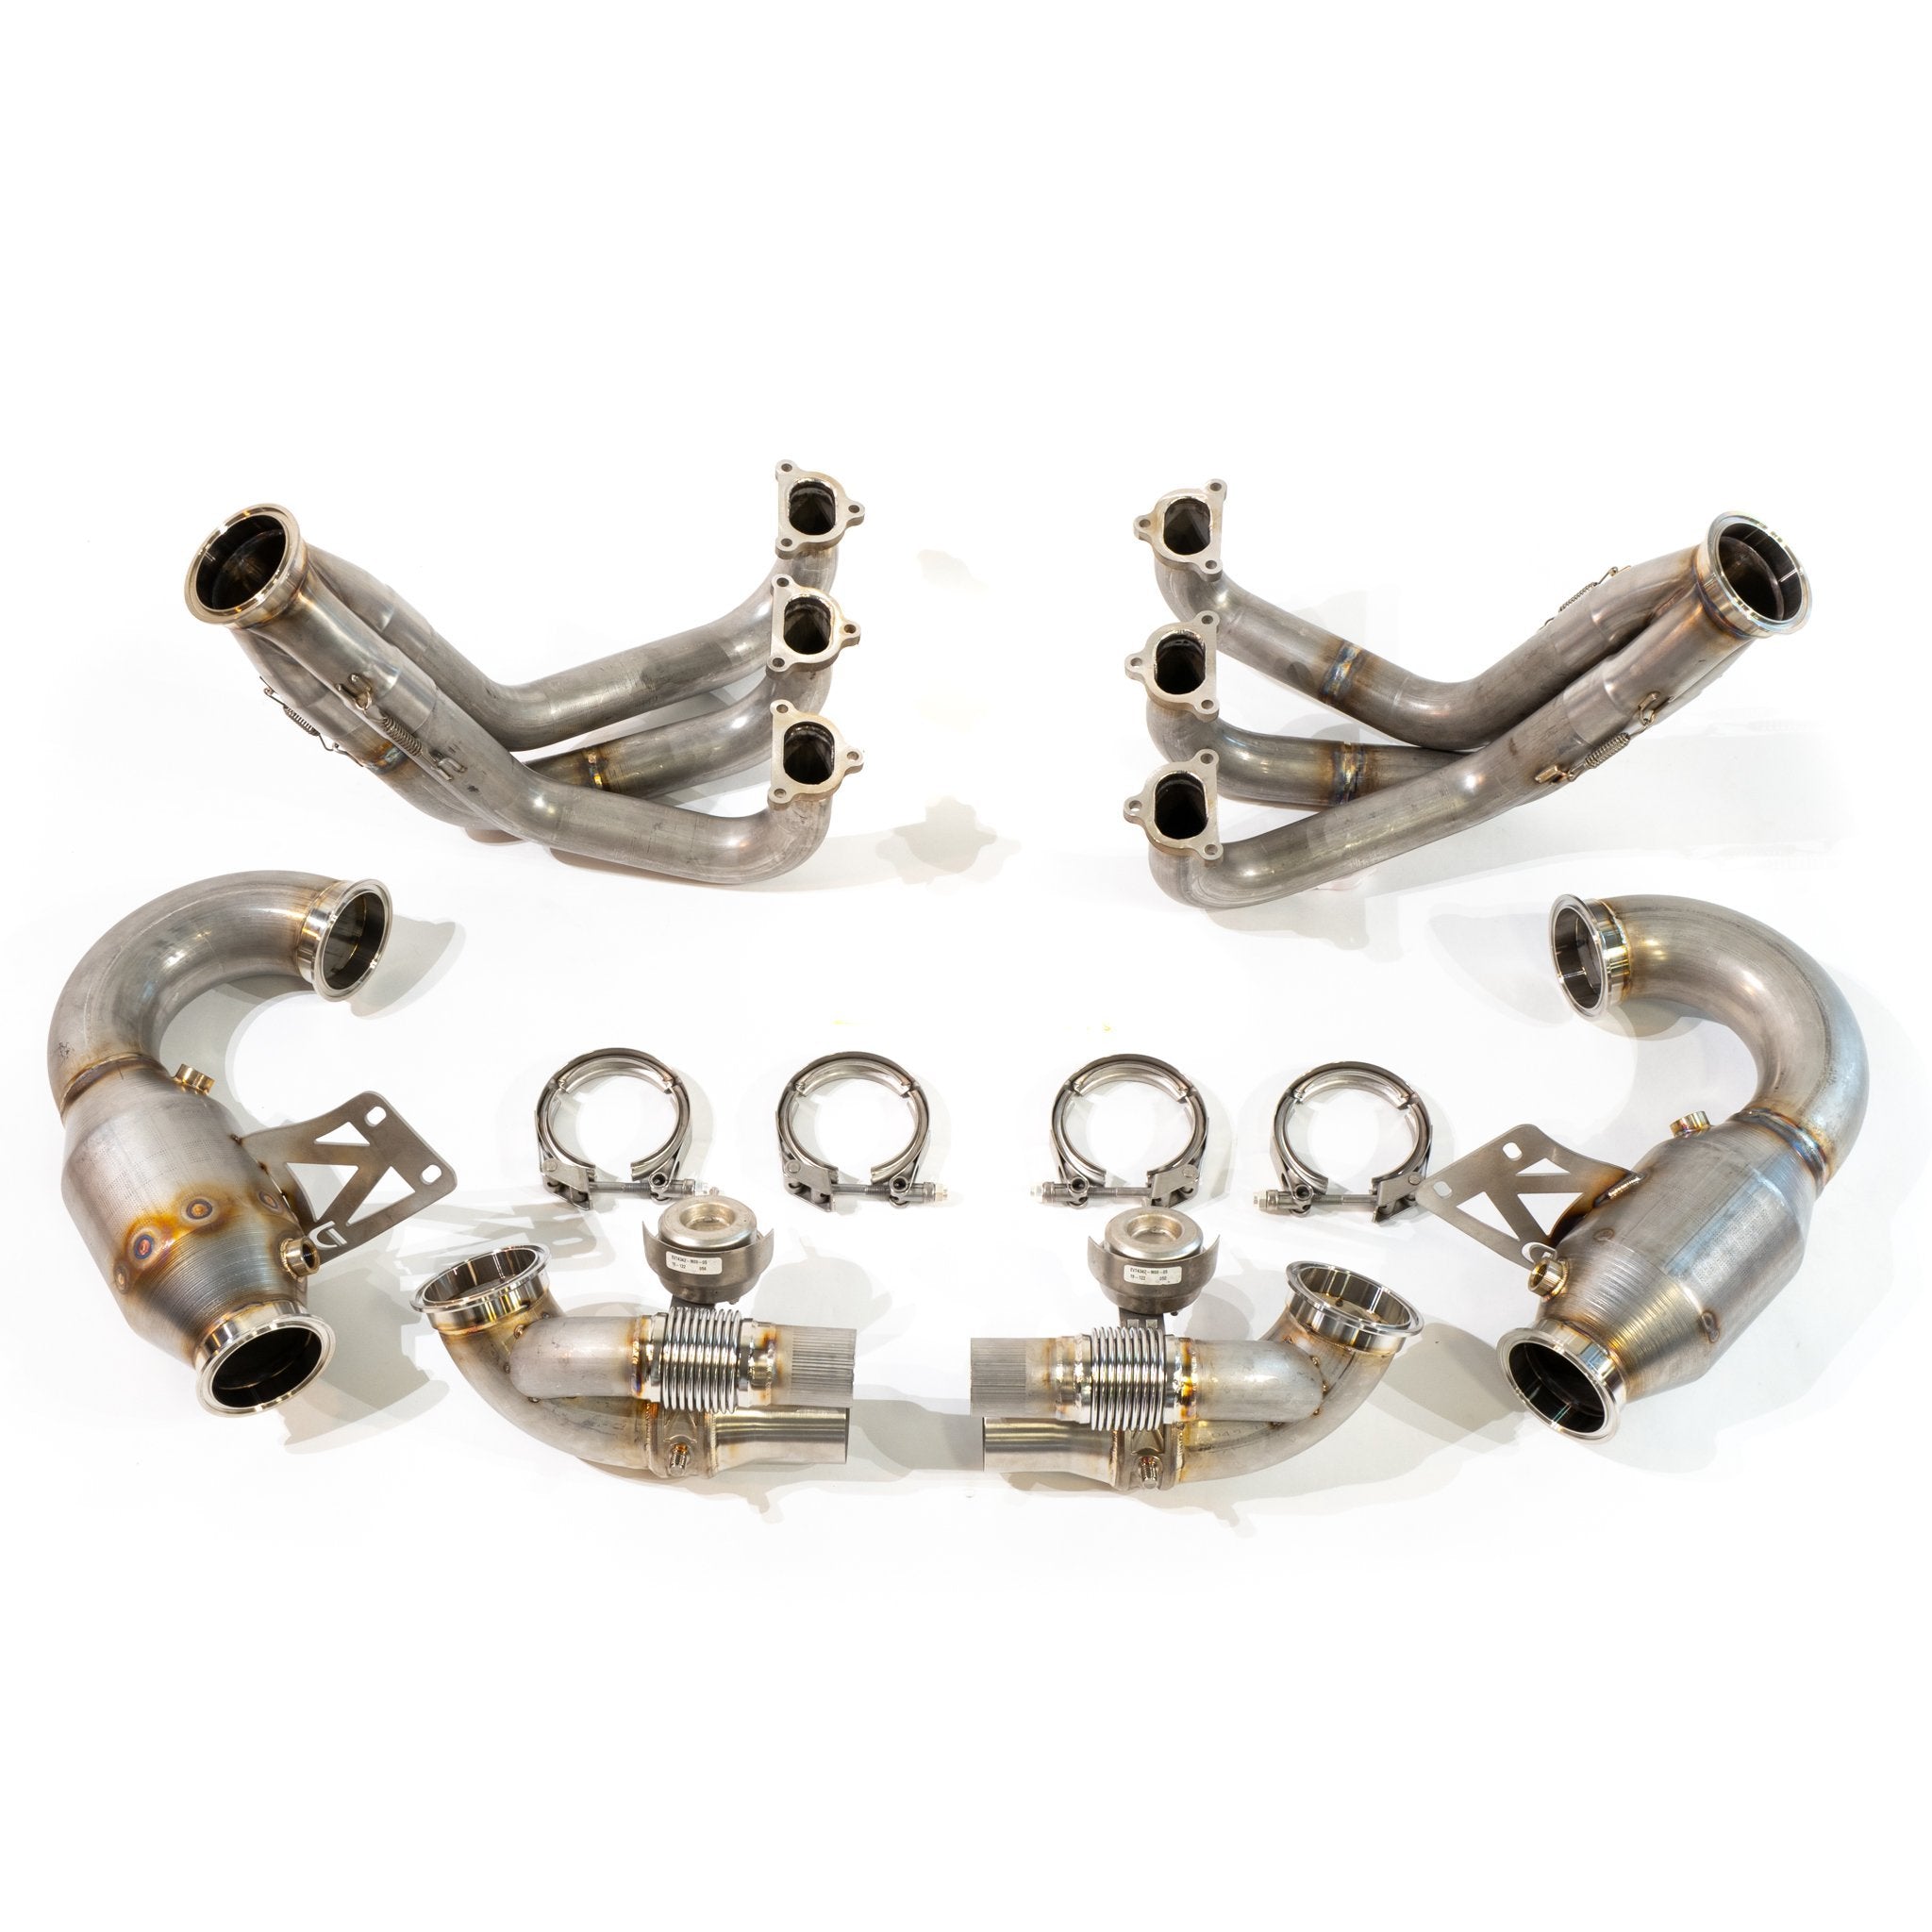 Pre-Owned 991.2 GT3/RS Long Tube Street Header Exhaust System - Dundon Motorsports